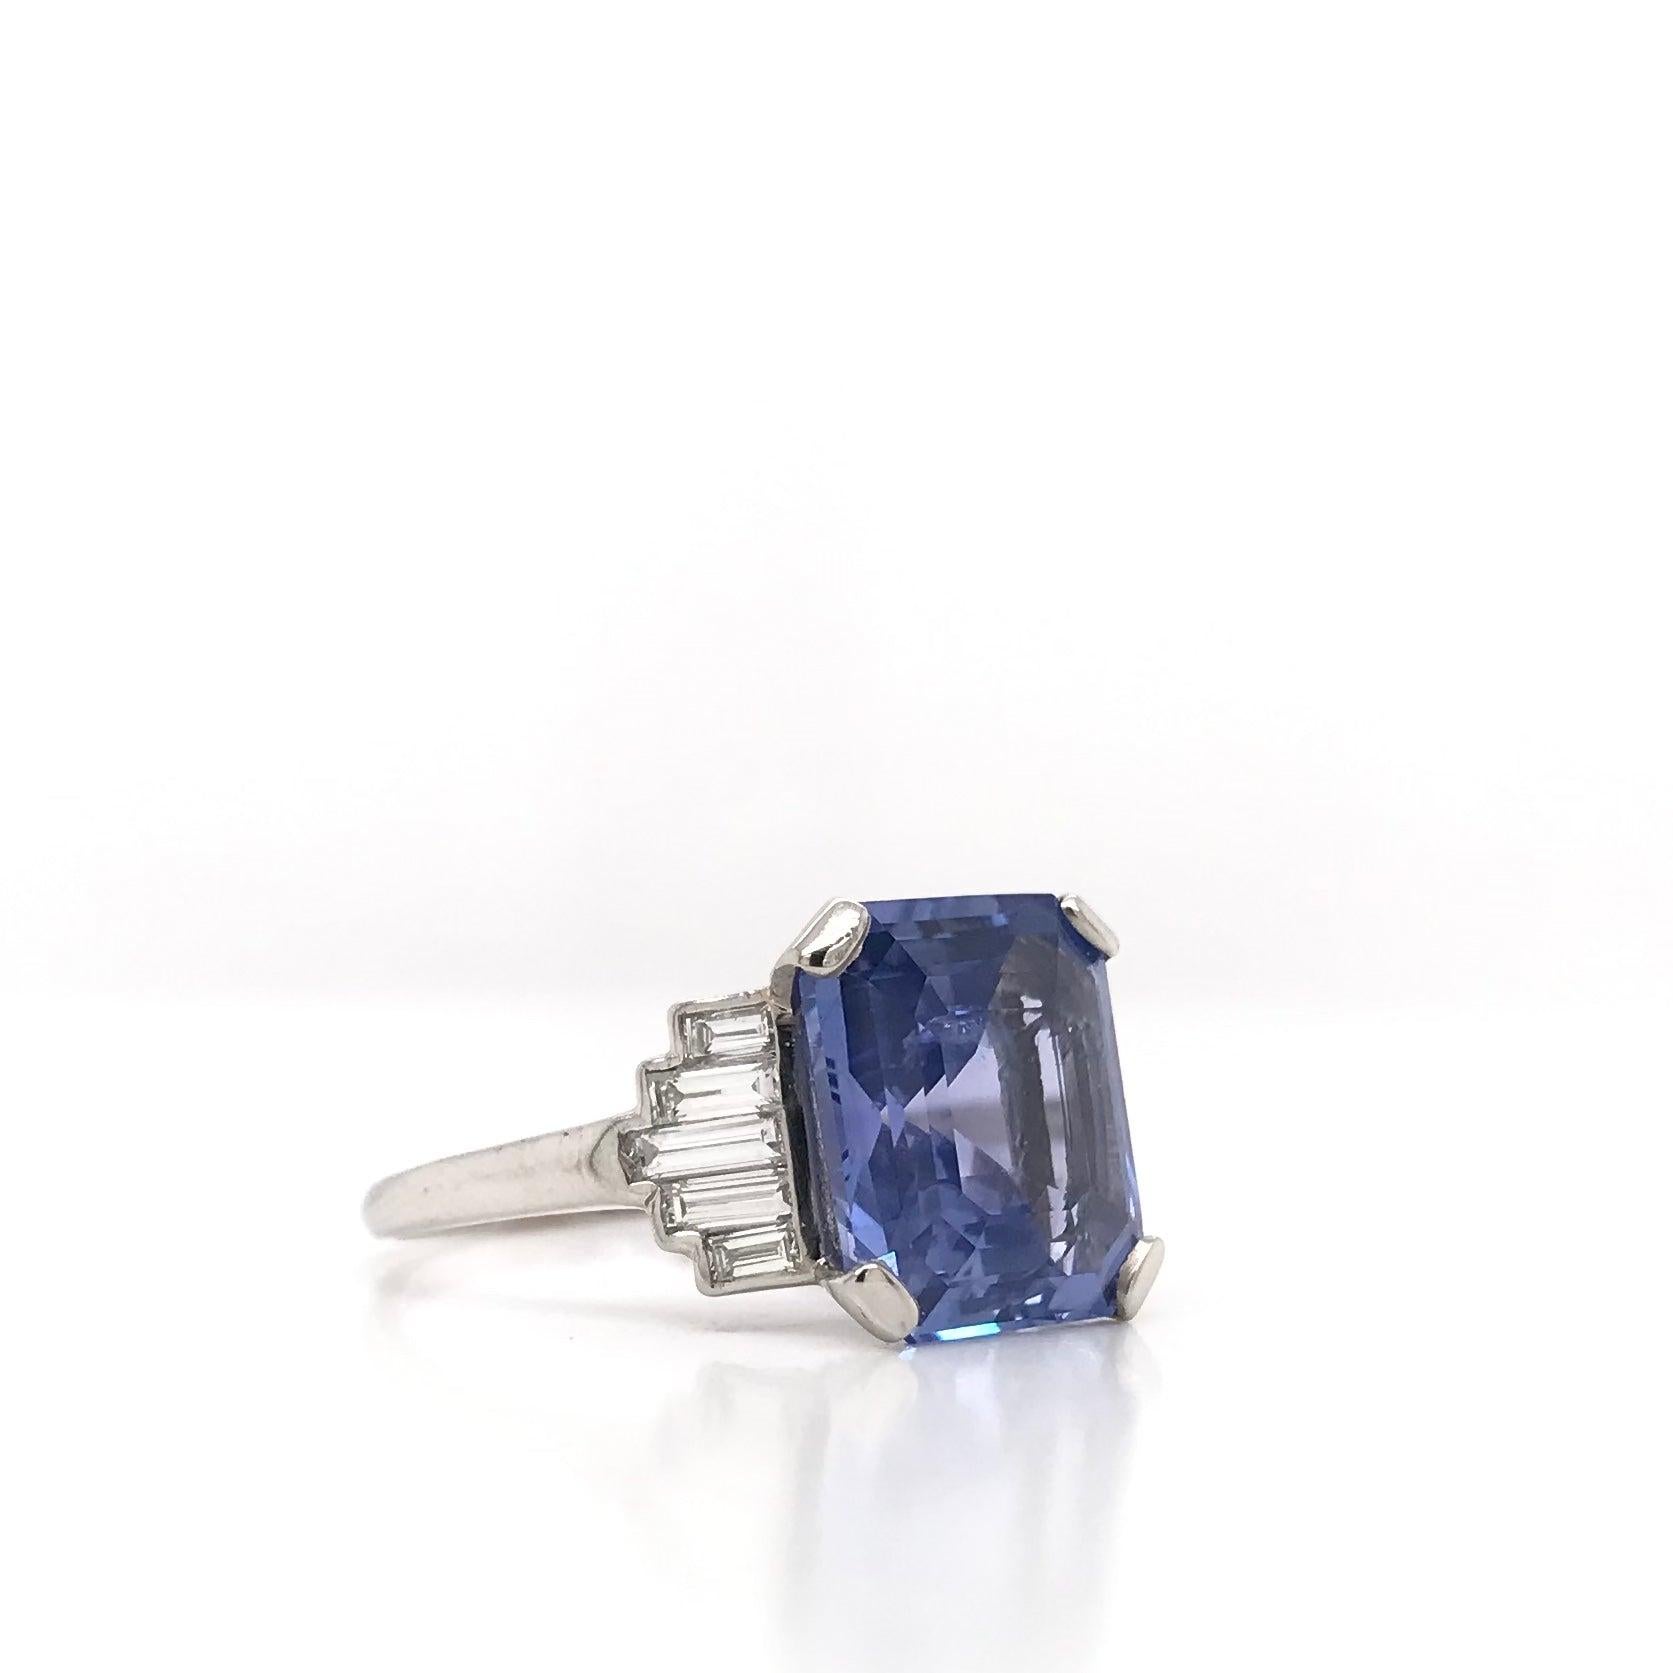 This stunning antique piece was handcrafted sometime during the Art Deco design period ( 1920-1940 ). The center stone is an incredible unheated Ceylon sapphire. The sapphire is a fancy cut measuring approximately 5.63 carats. Ceylon sapphires